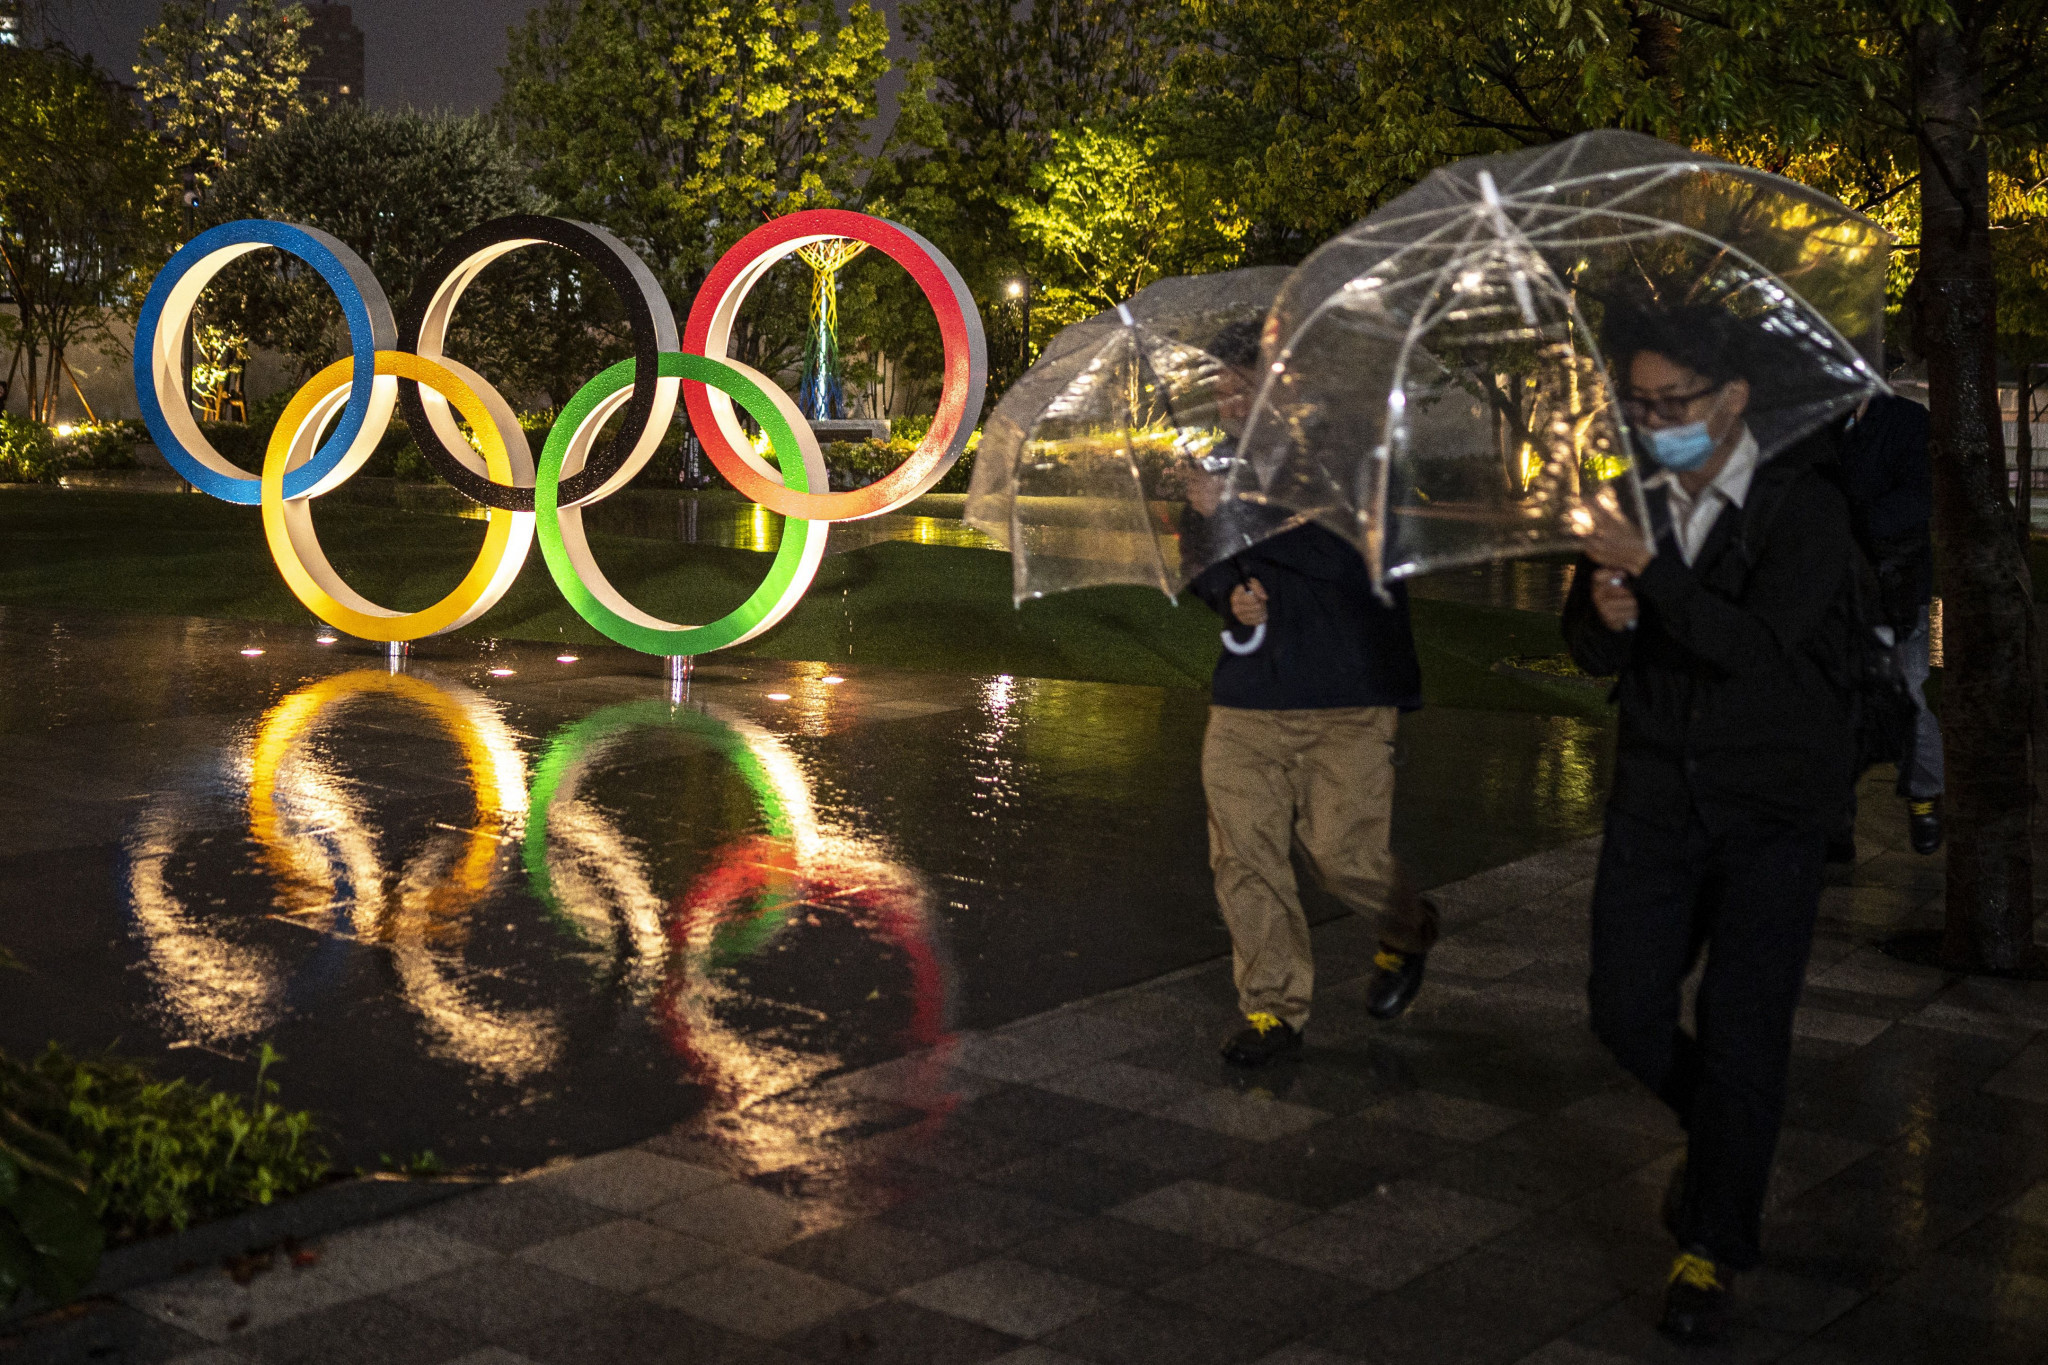 Tokyo 2020 organisers have put together a series of COVID-19 countermeasures for the Games ©Getty Images